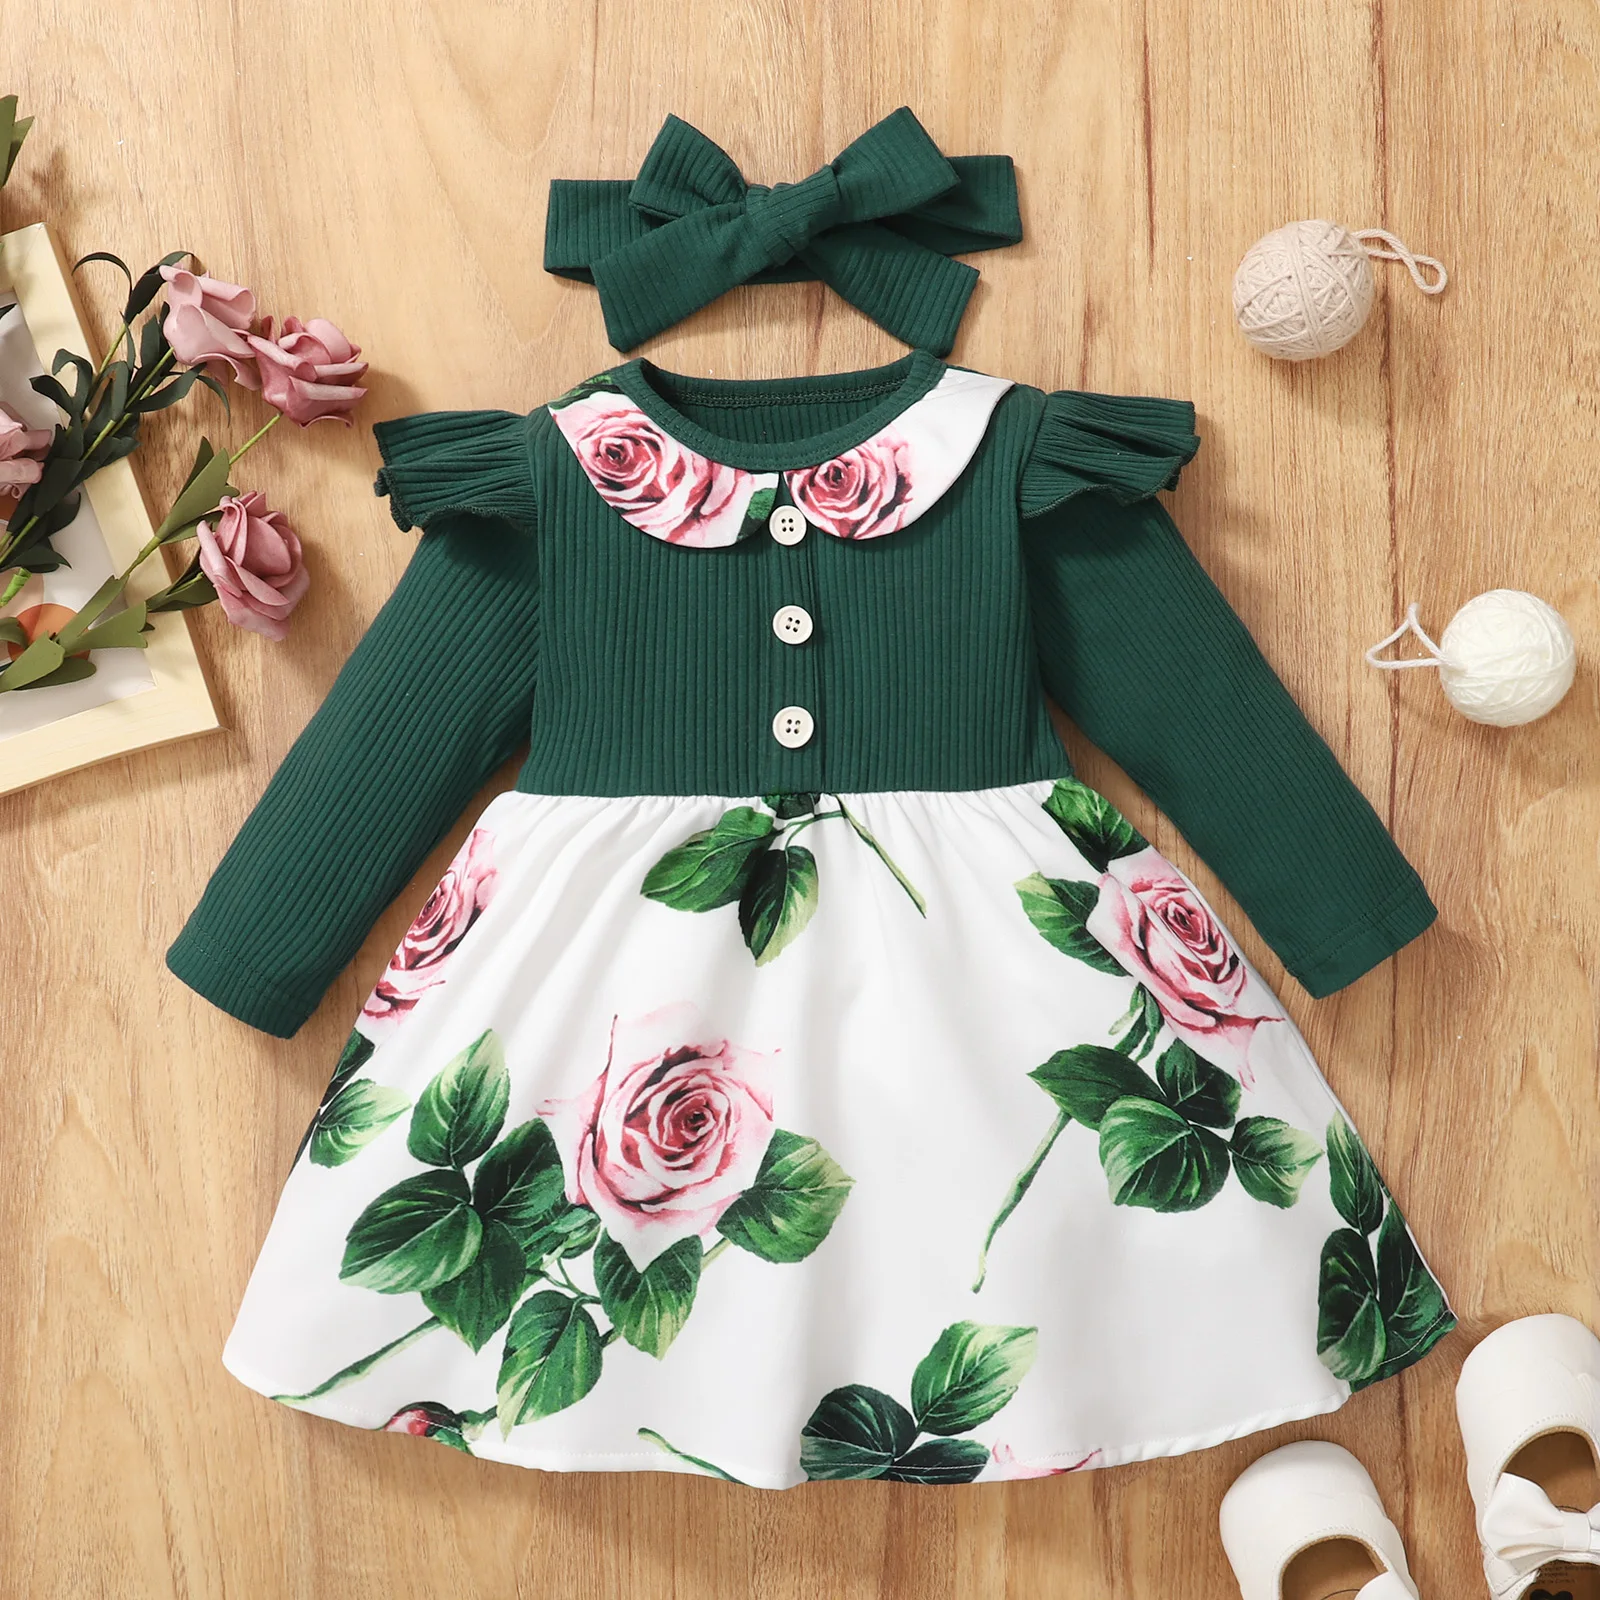 6M-4T Toddler Girl Dresses Long Sleeve Green Floral Print Button Patchwork Dress + Headband Kids Baby Girl Clothes